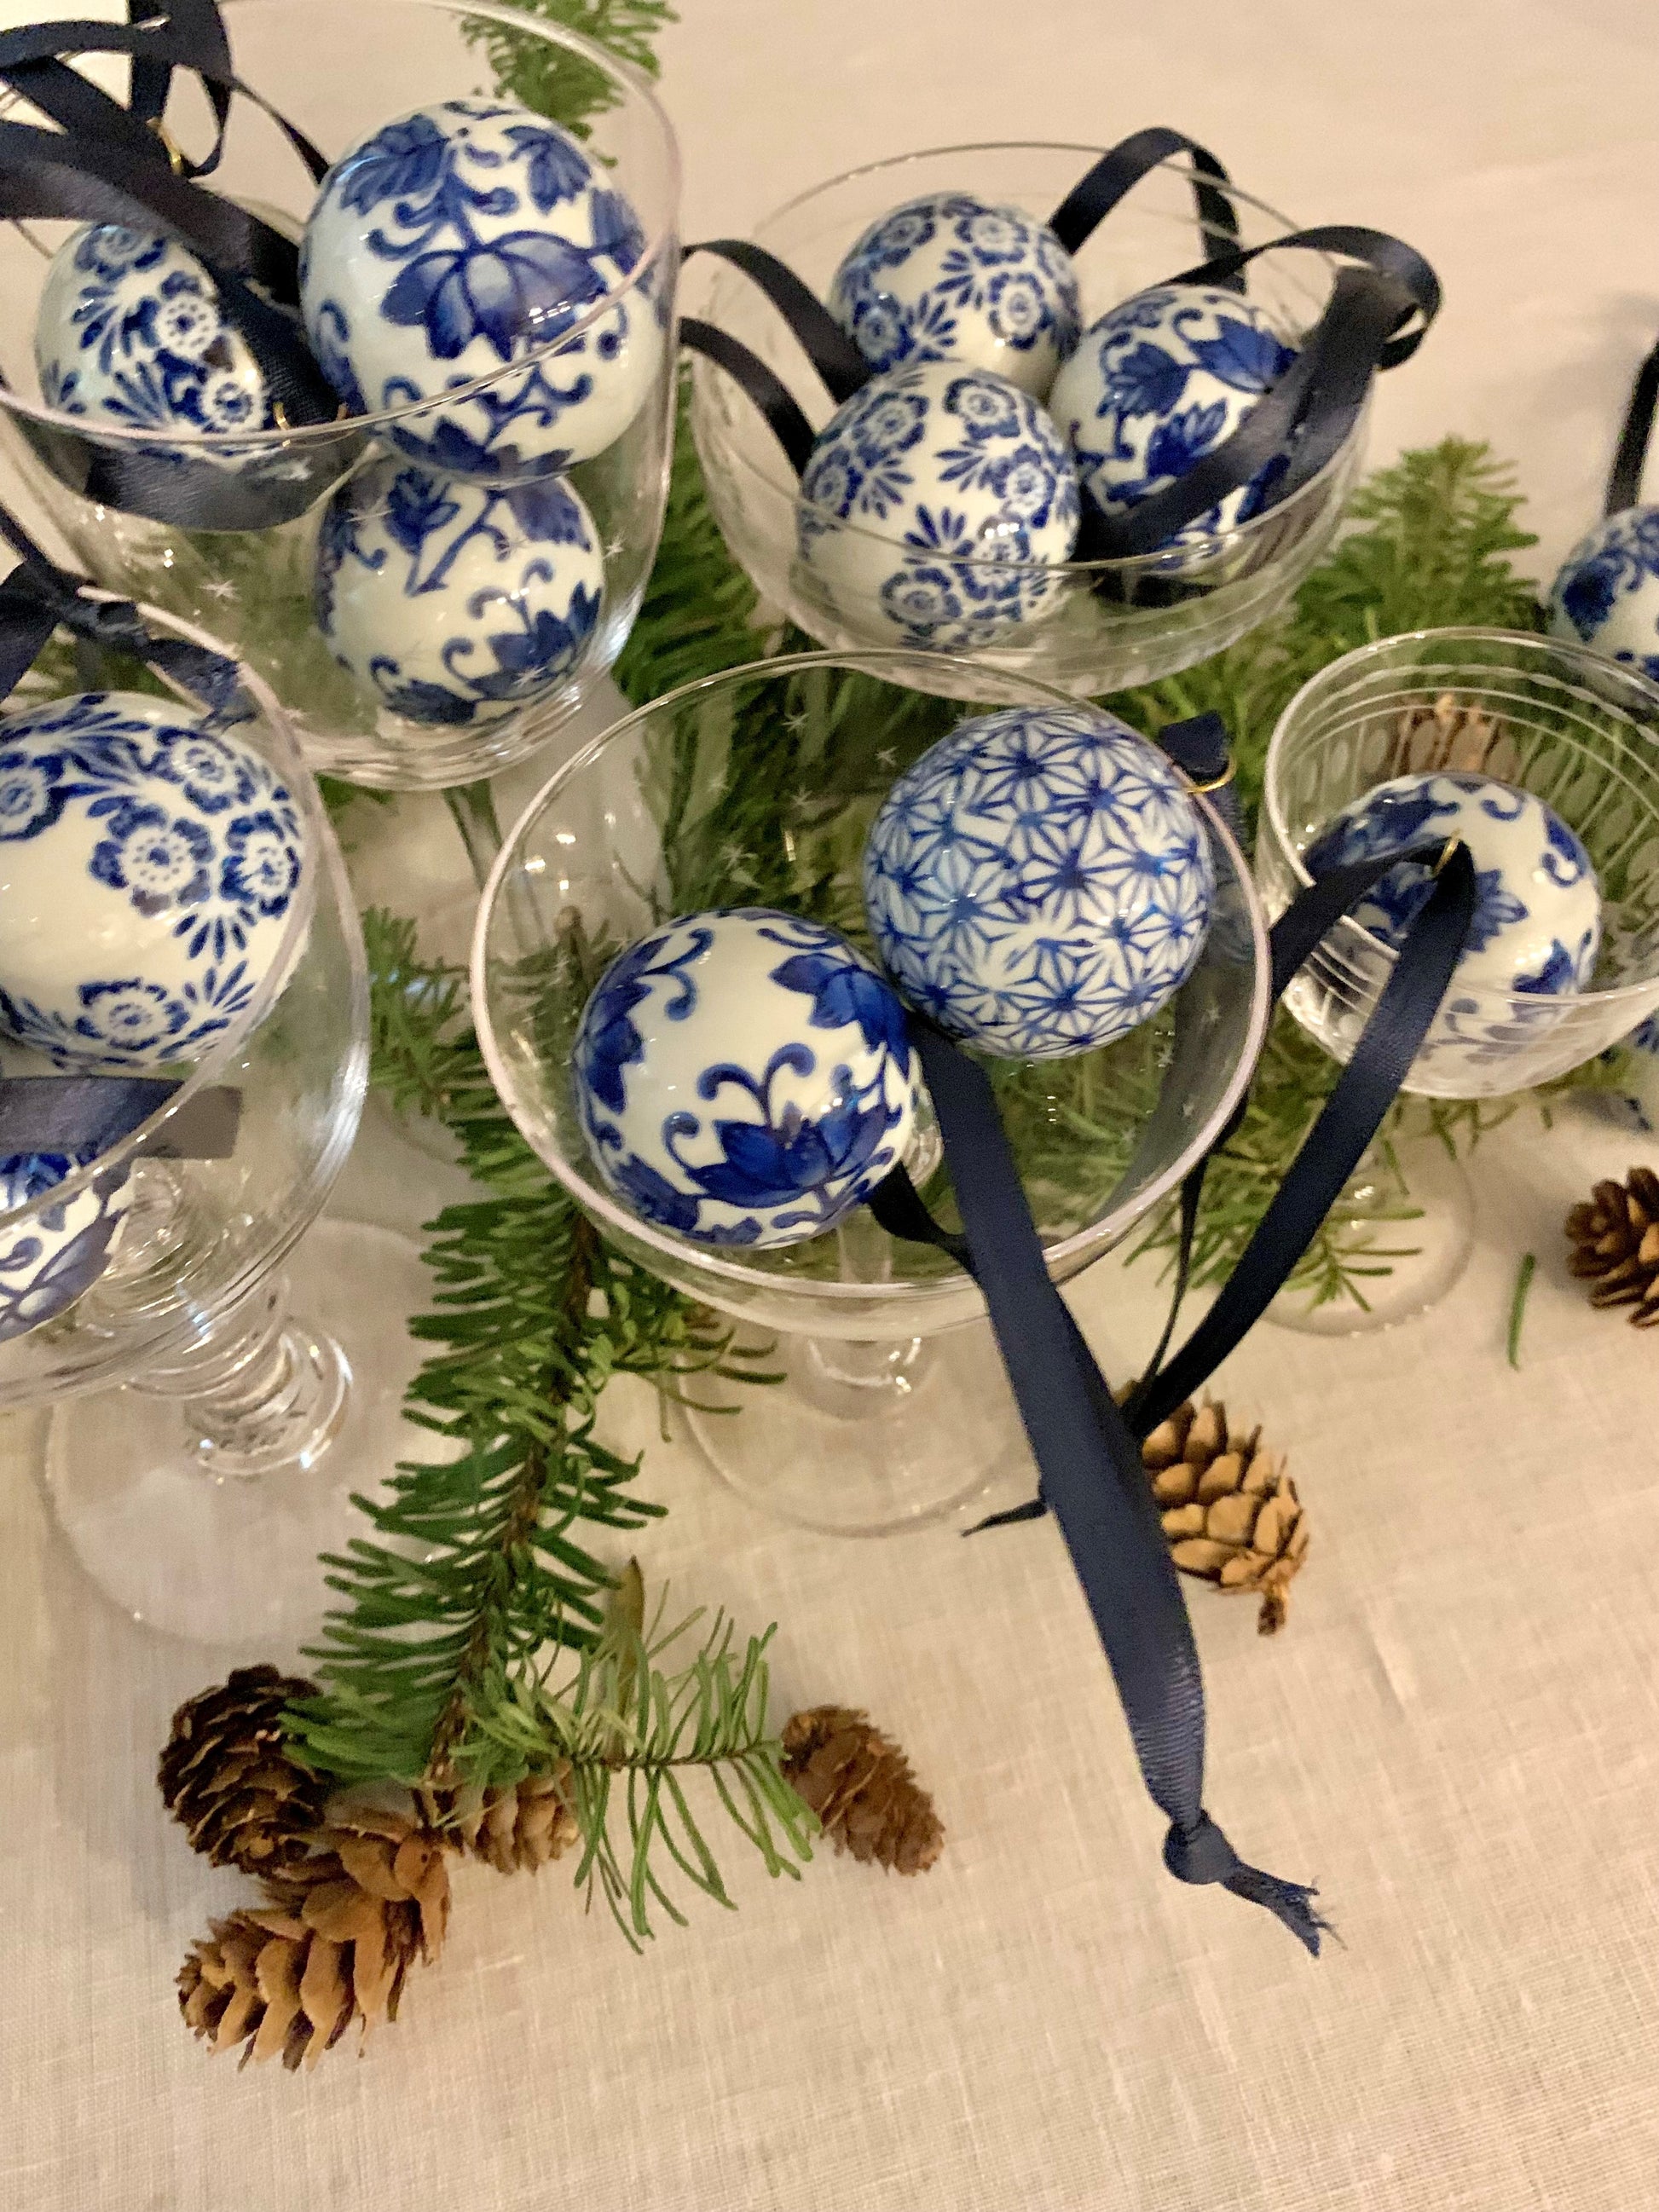 mini blue and white ceamic baubles in champagne coupes surrounded by christmas greenery